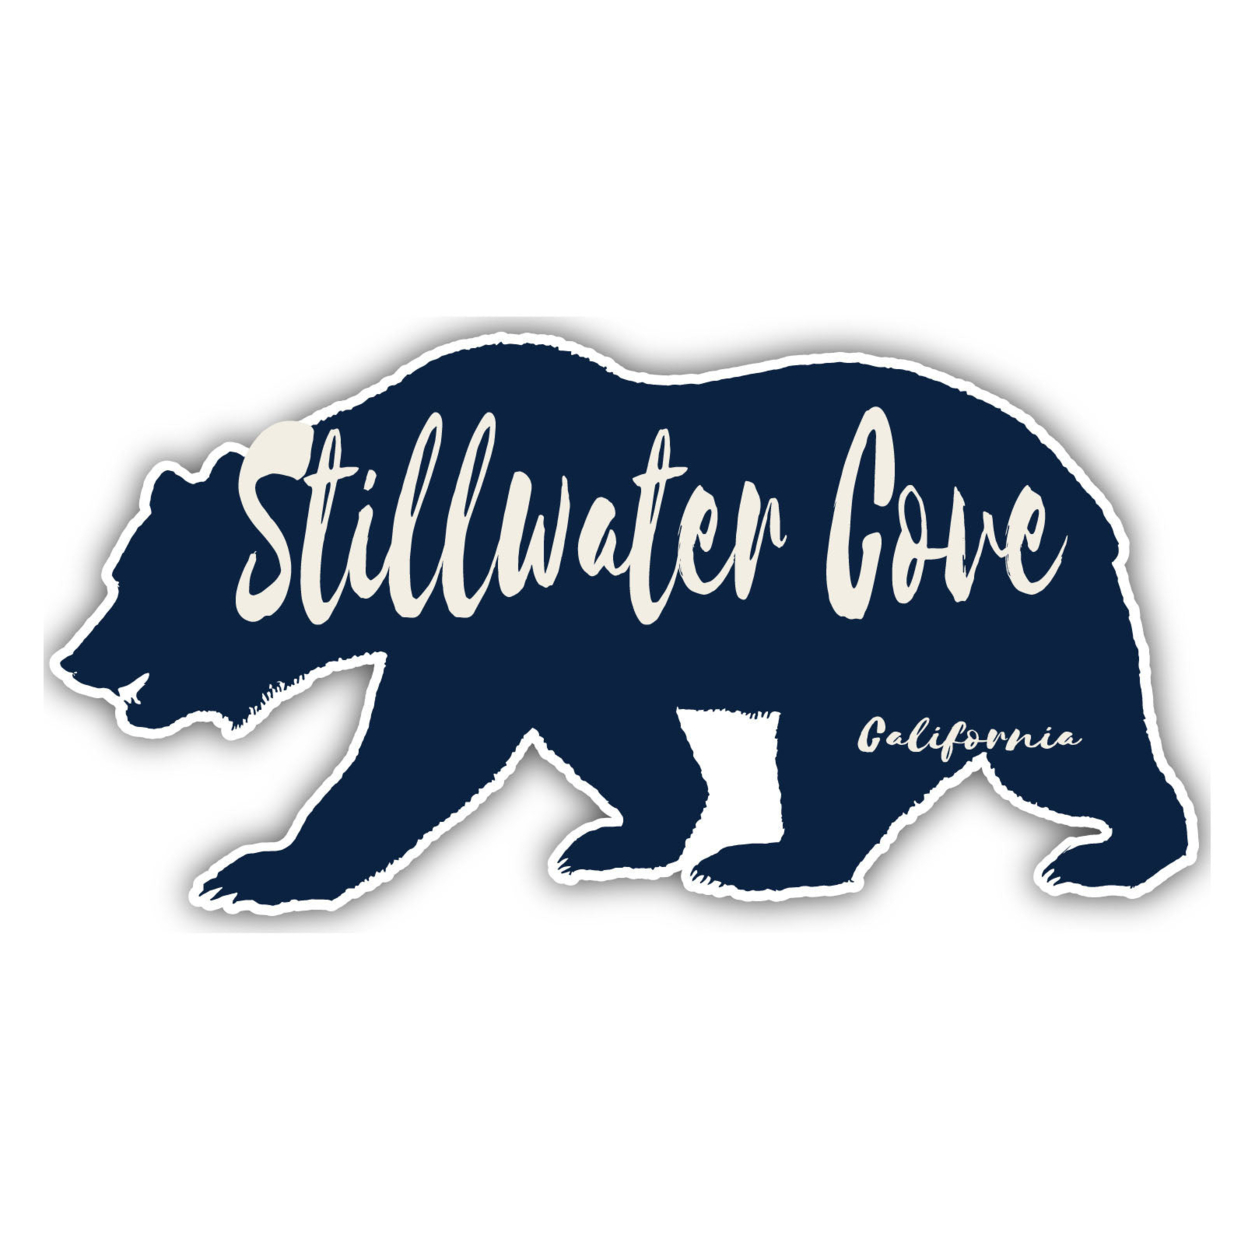 Stillwater Cove California Souvenir Decorative Stickers (Choose Theme And Size) - Single Unit, 2-Inch, Great Outdoors